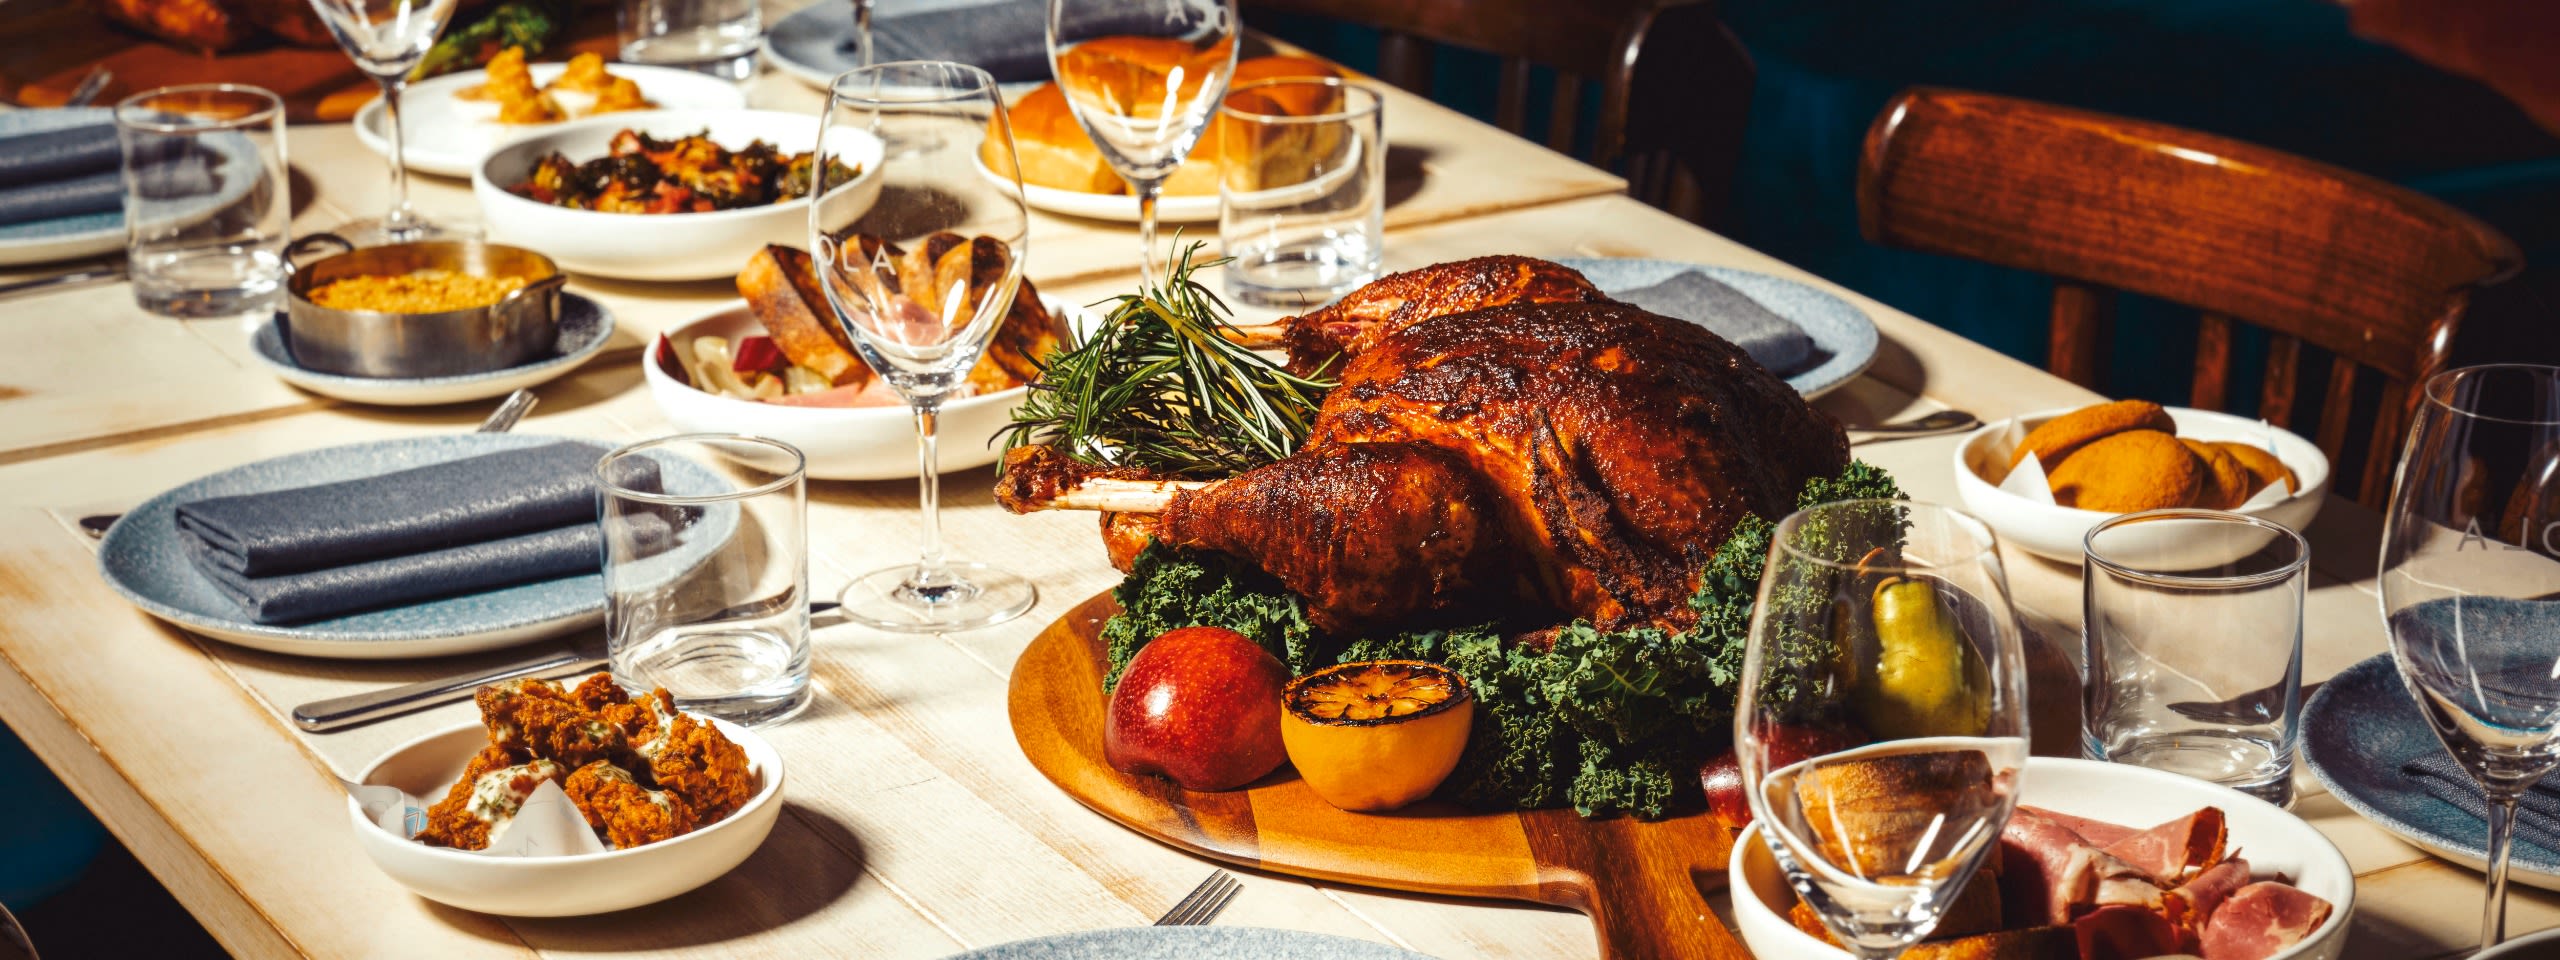 Celebrate Thanksgiving in Sydney | City of Sydney - What’s On